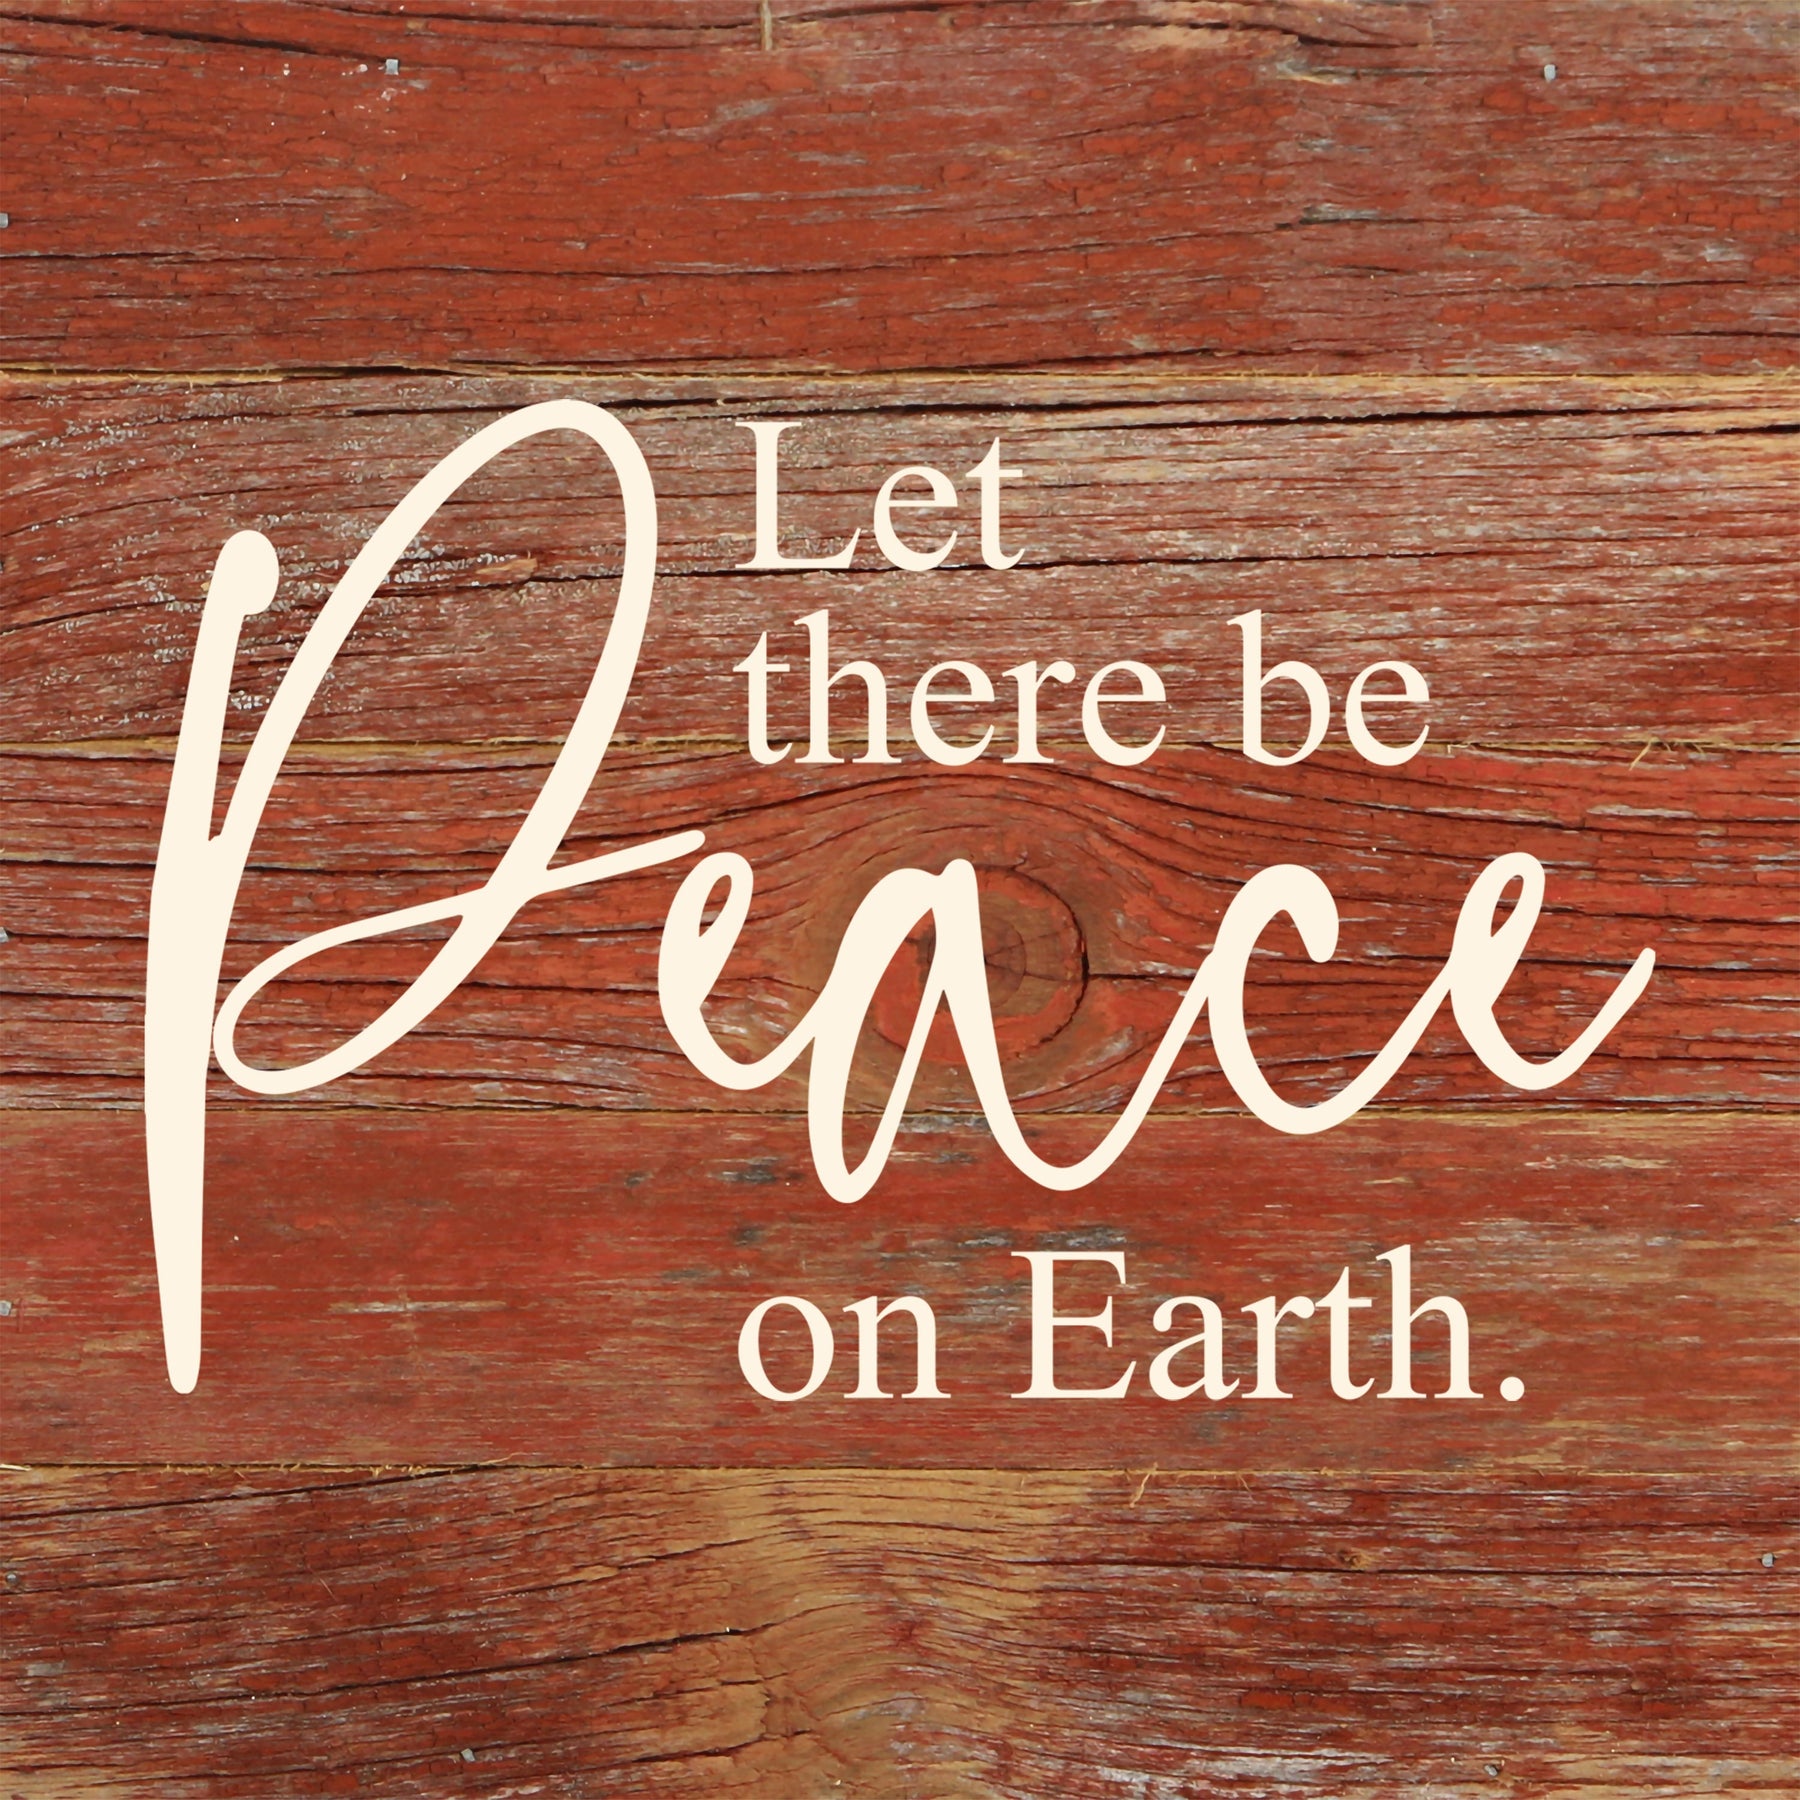 Let there be peace on Earth. / 6"x6" Reclaimed Wood Sign